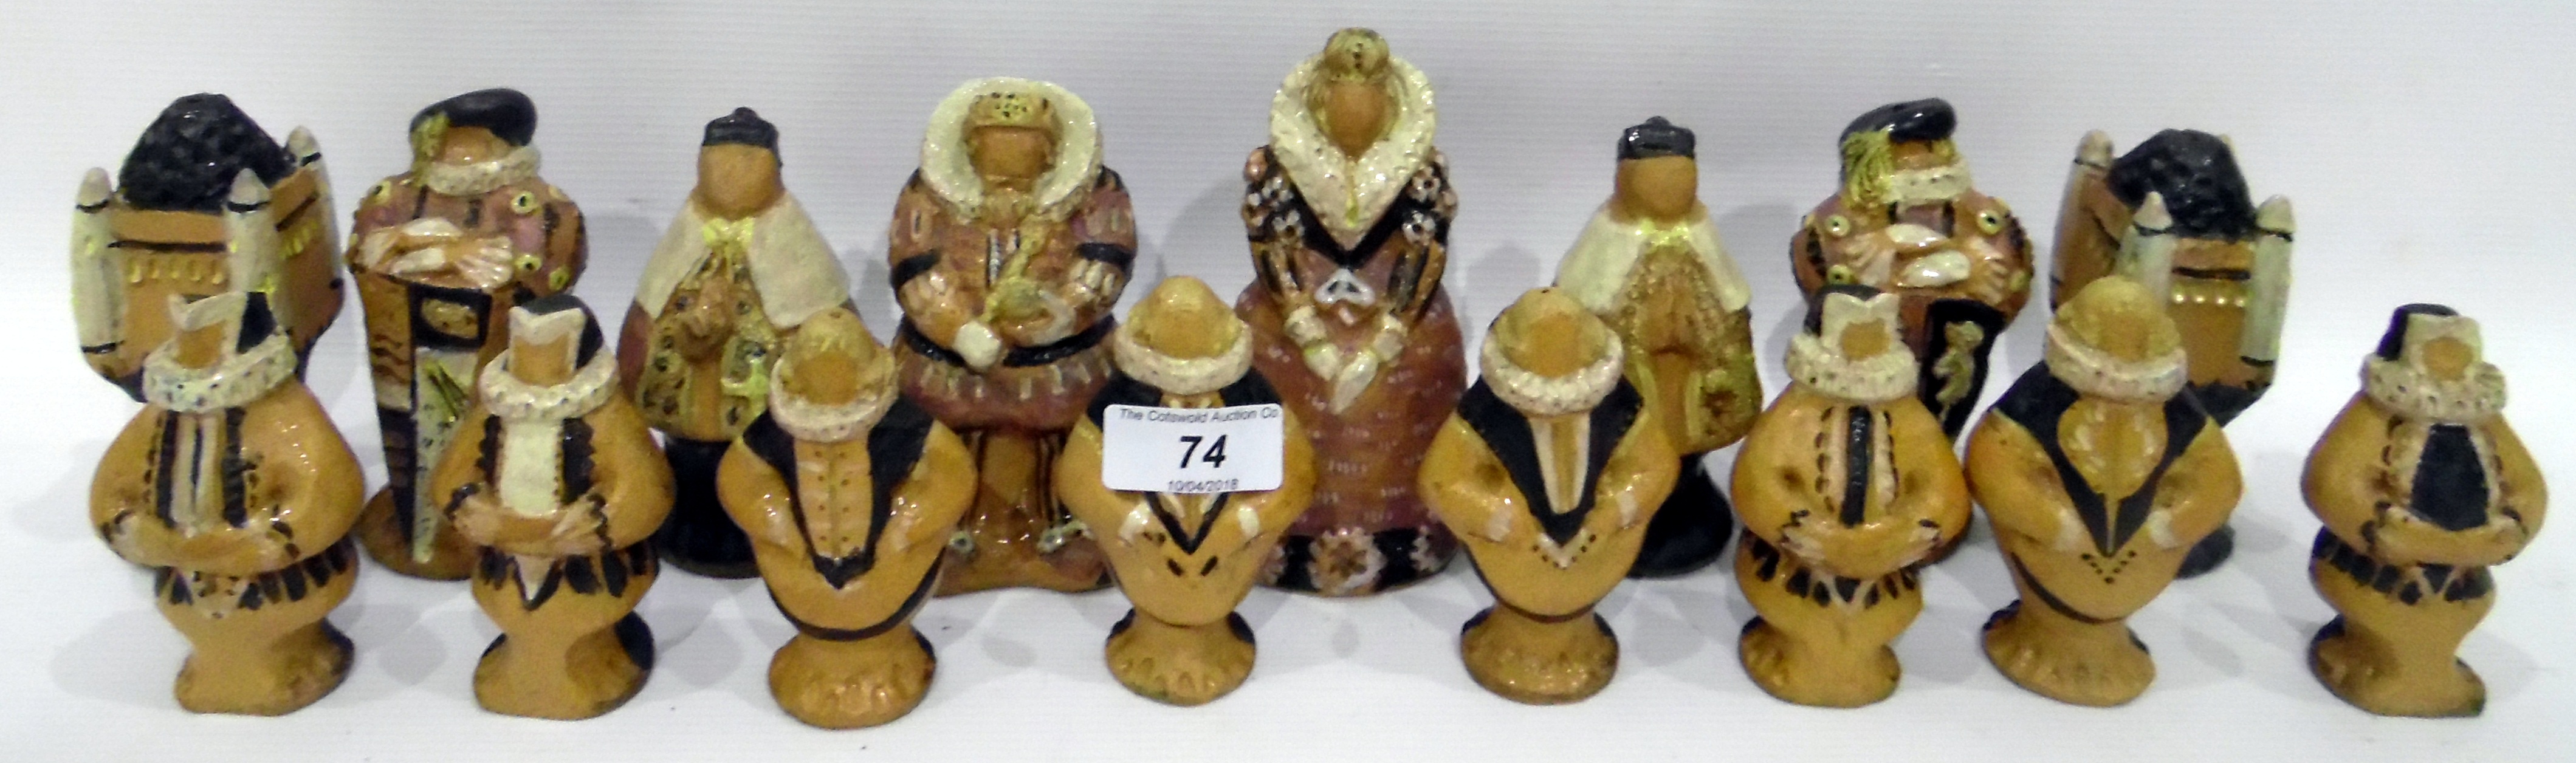 Studio pottery chess figures of 16 pieces, - Image 2 of 2